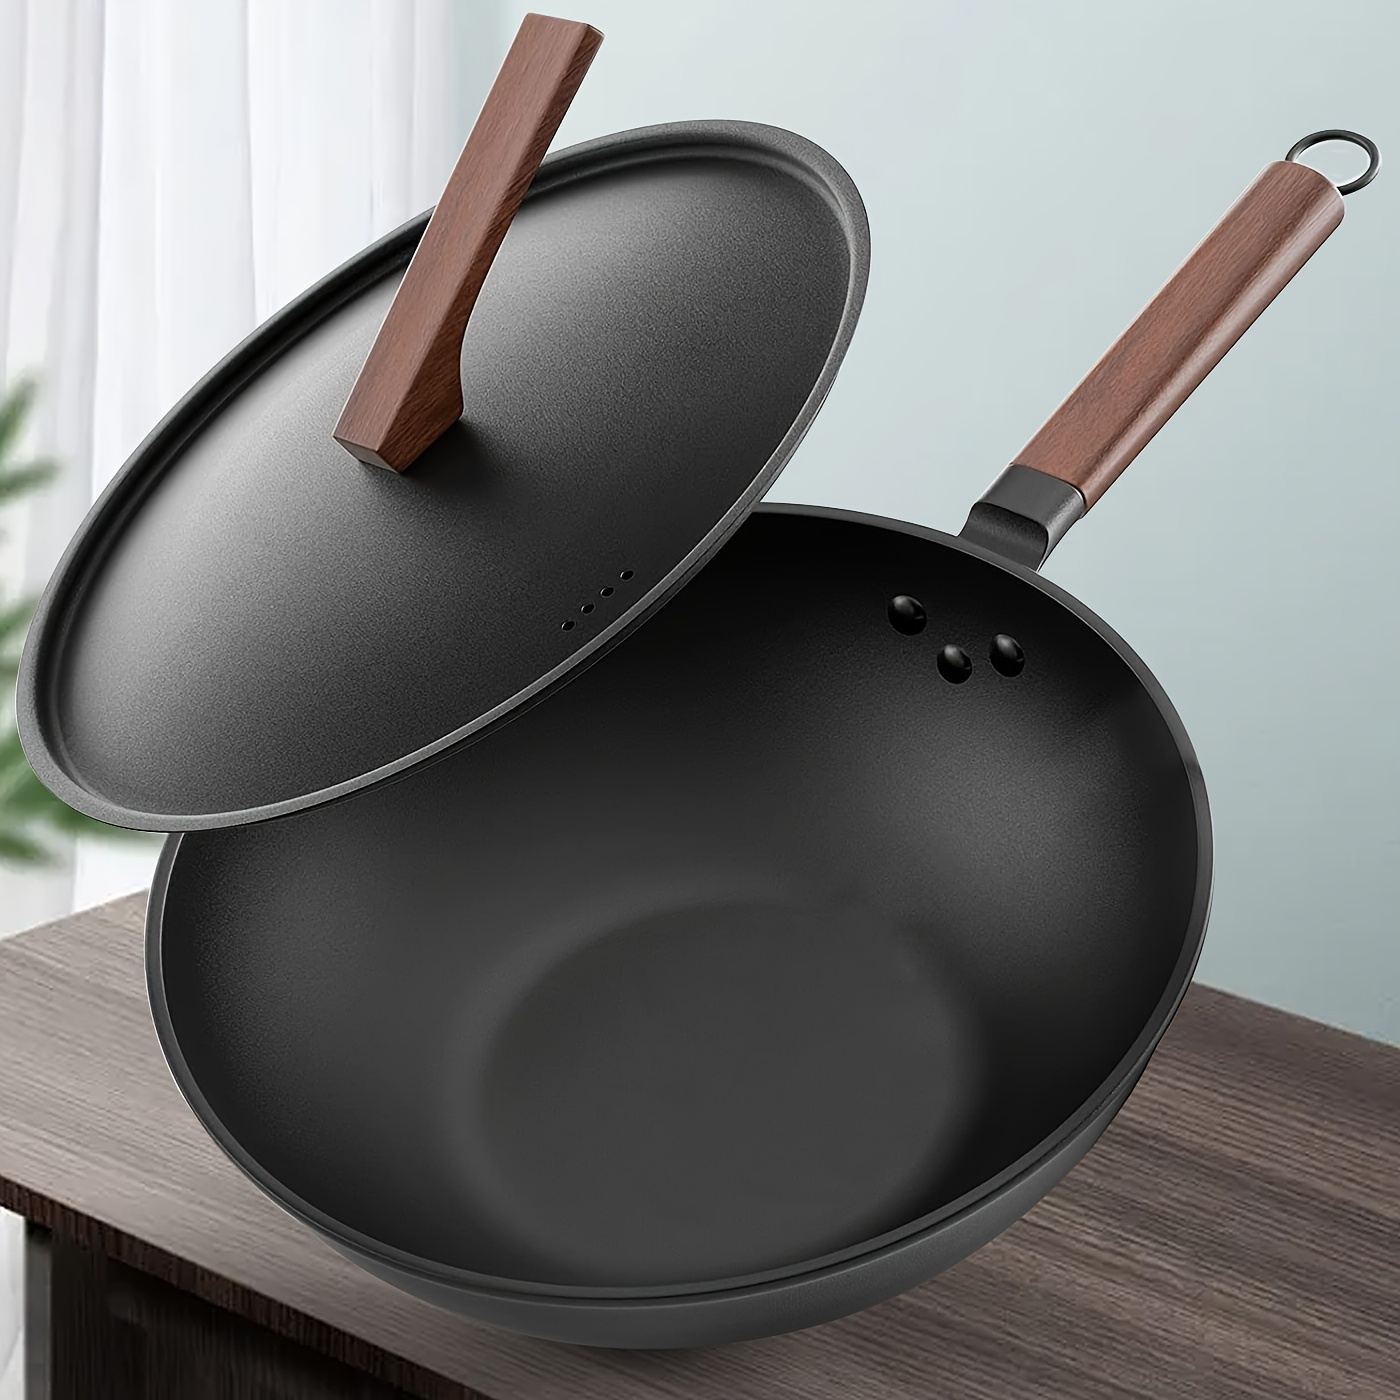 BrBrGo Wok Pan, 13" Carbon Steel Wok with Wooden Handle, Flat Bottom  Chinese Stir Fry Wok, 10 Pieces Set with Cooking Utensils, Frying Pan for  All Sto ドライバー、レンチ